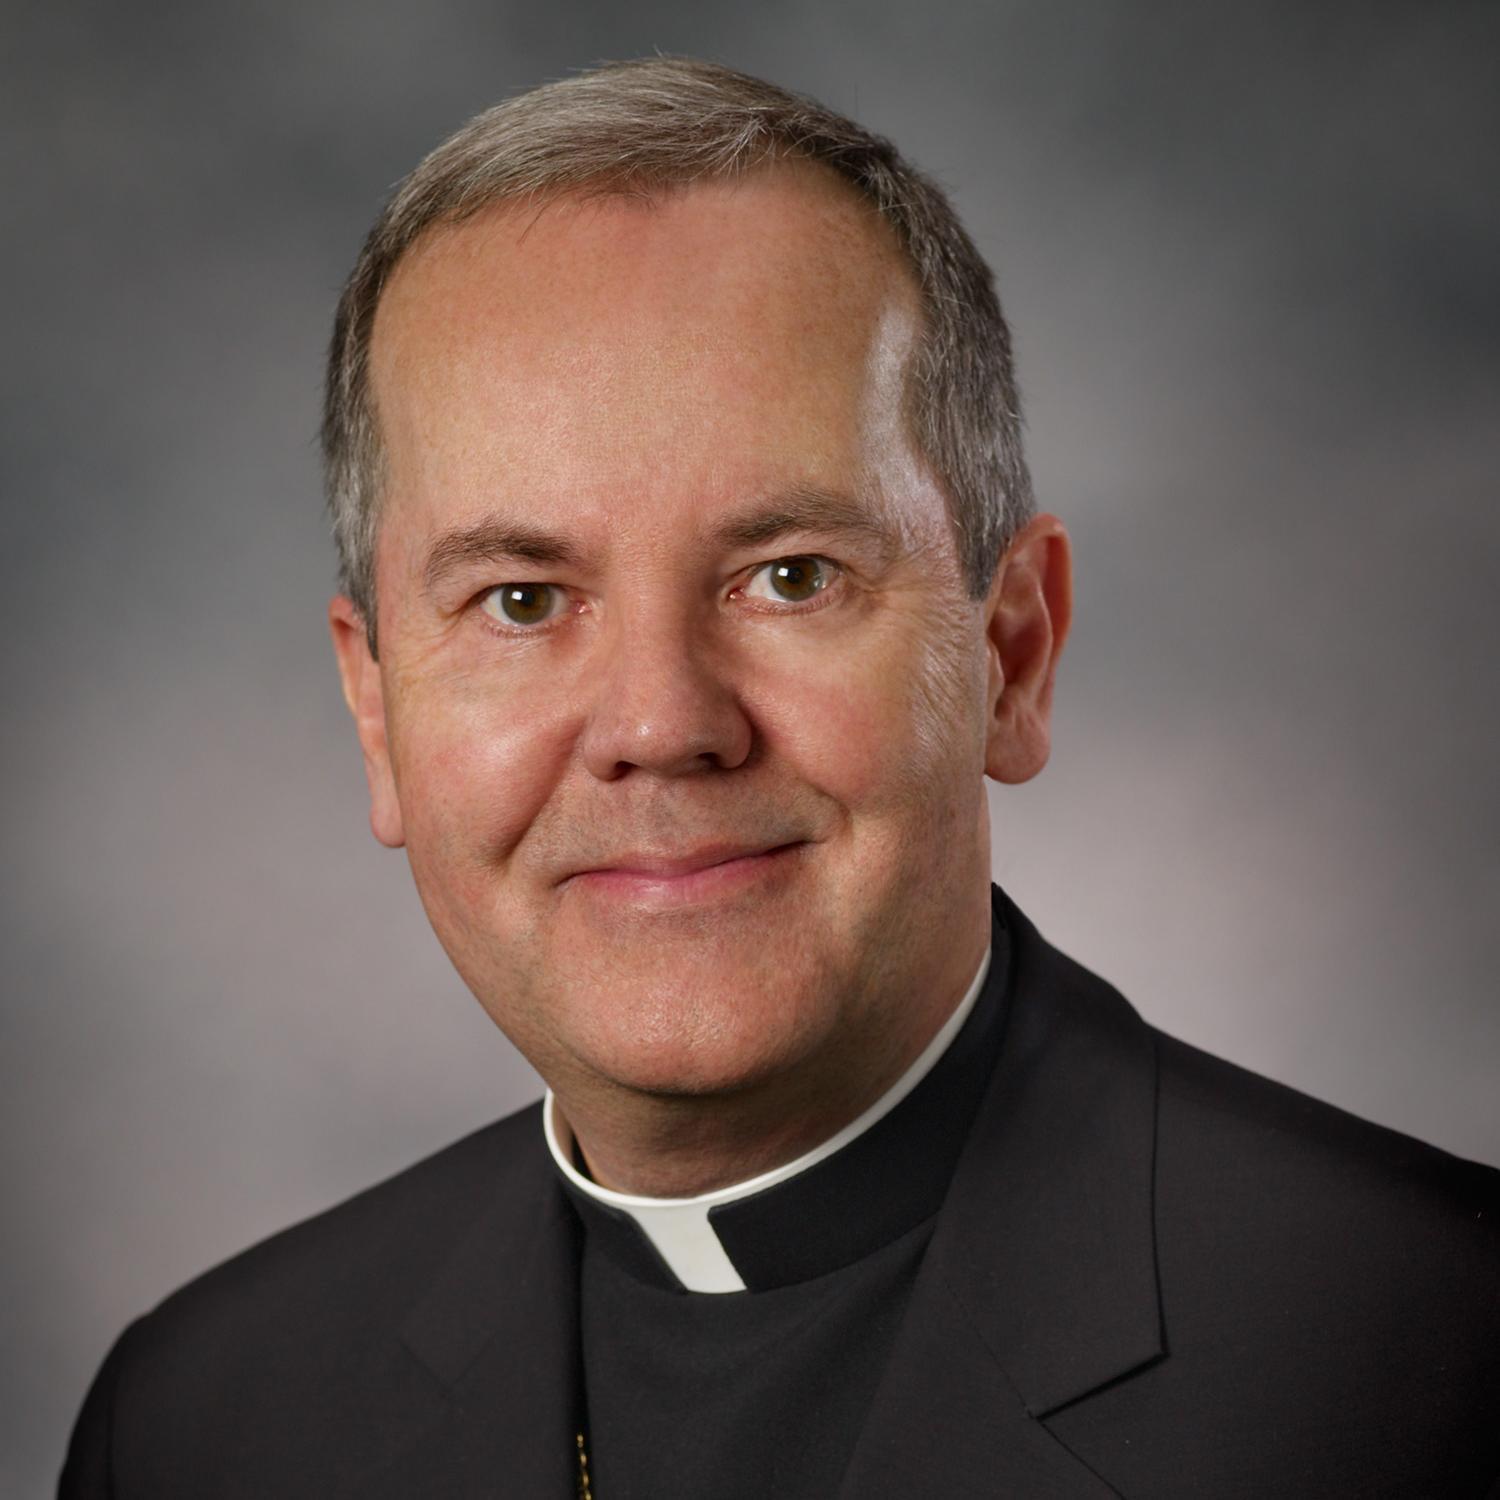 Tenth Bishop of The Diocese of Scranton, encompassing 11 counties in northeastern and north central Pennsylvania.